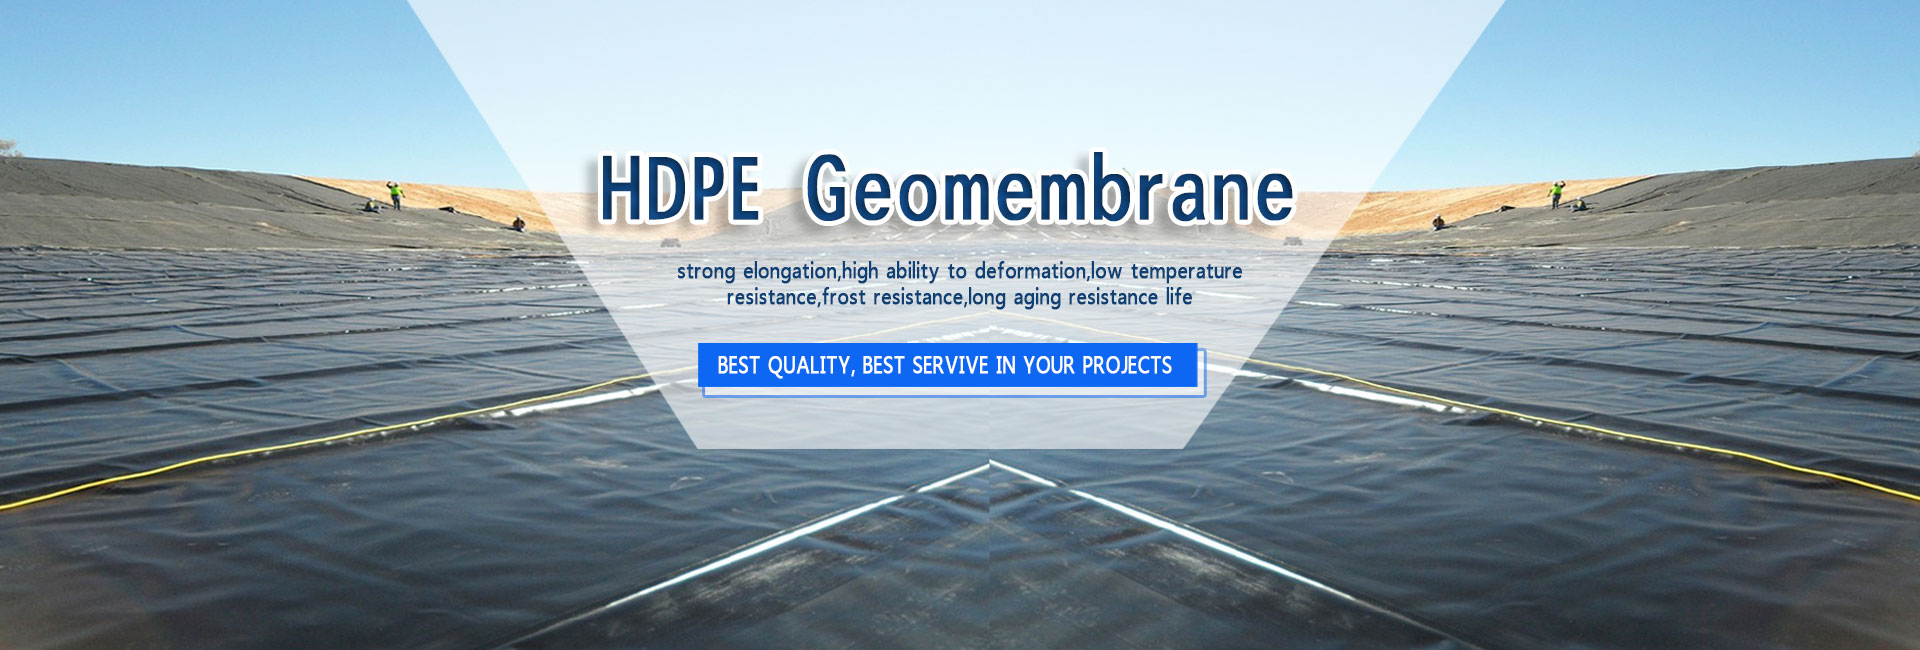 Professional manufacturer of geomembrane,OBOR Geosynthetics